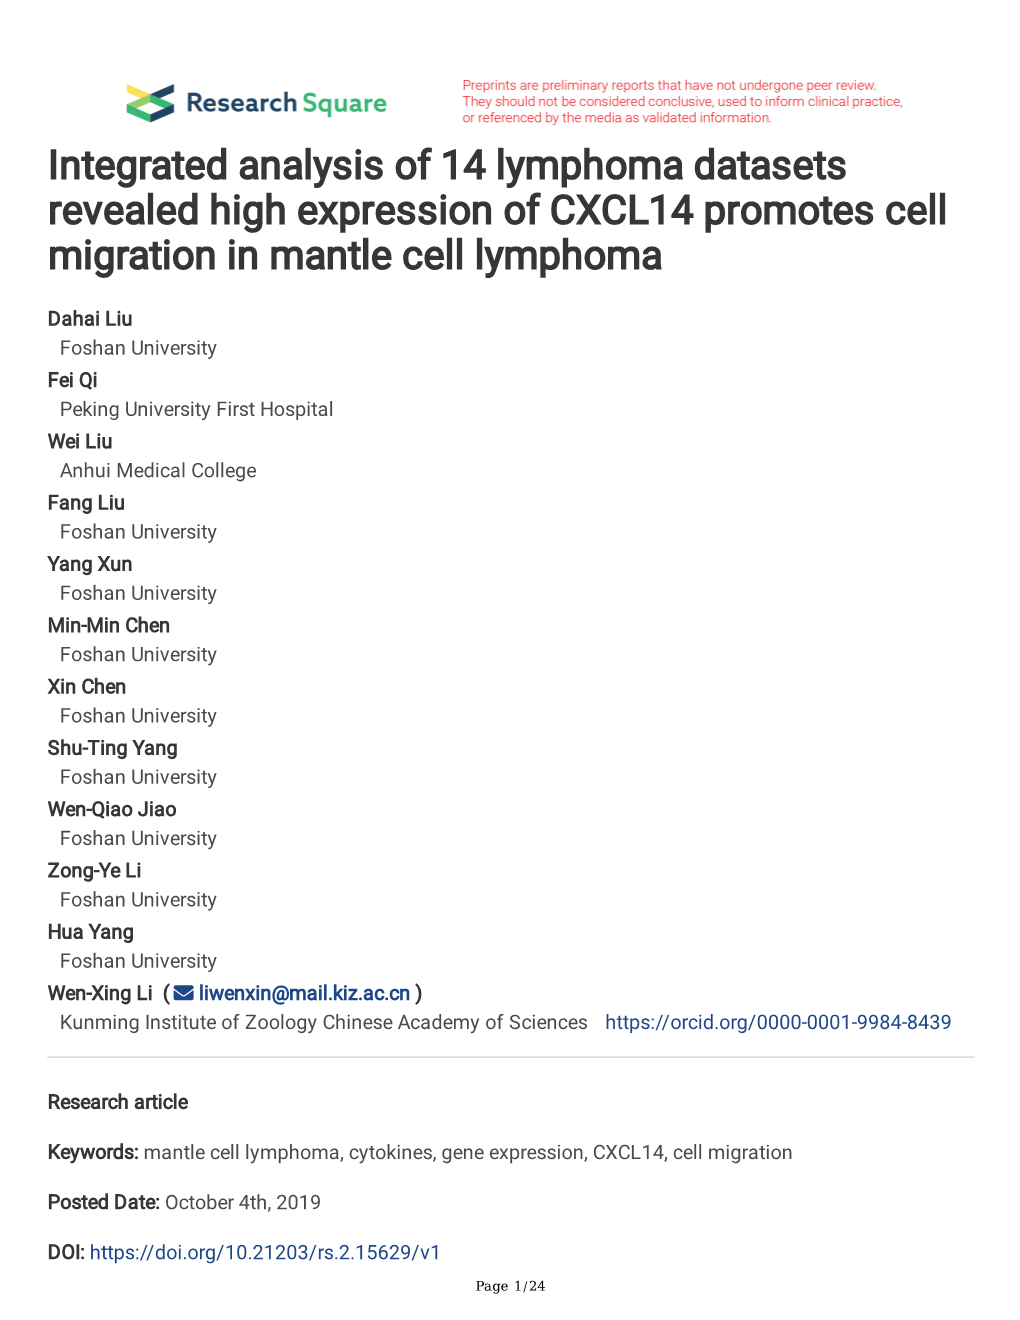 Integrated Analysis of 14 Lymphoma Datasets Revealed High Expression of CXCL14 Promotes Cell Migration in Mantle Cell Lymphoma